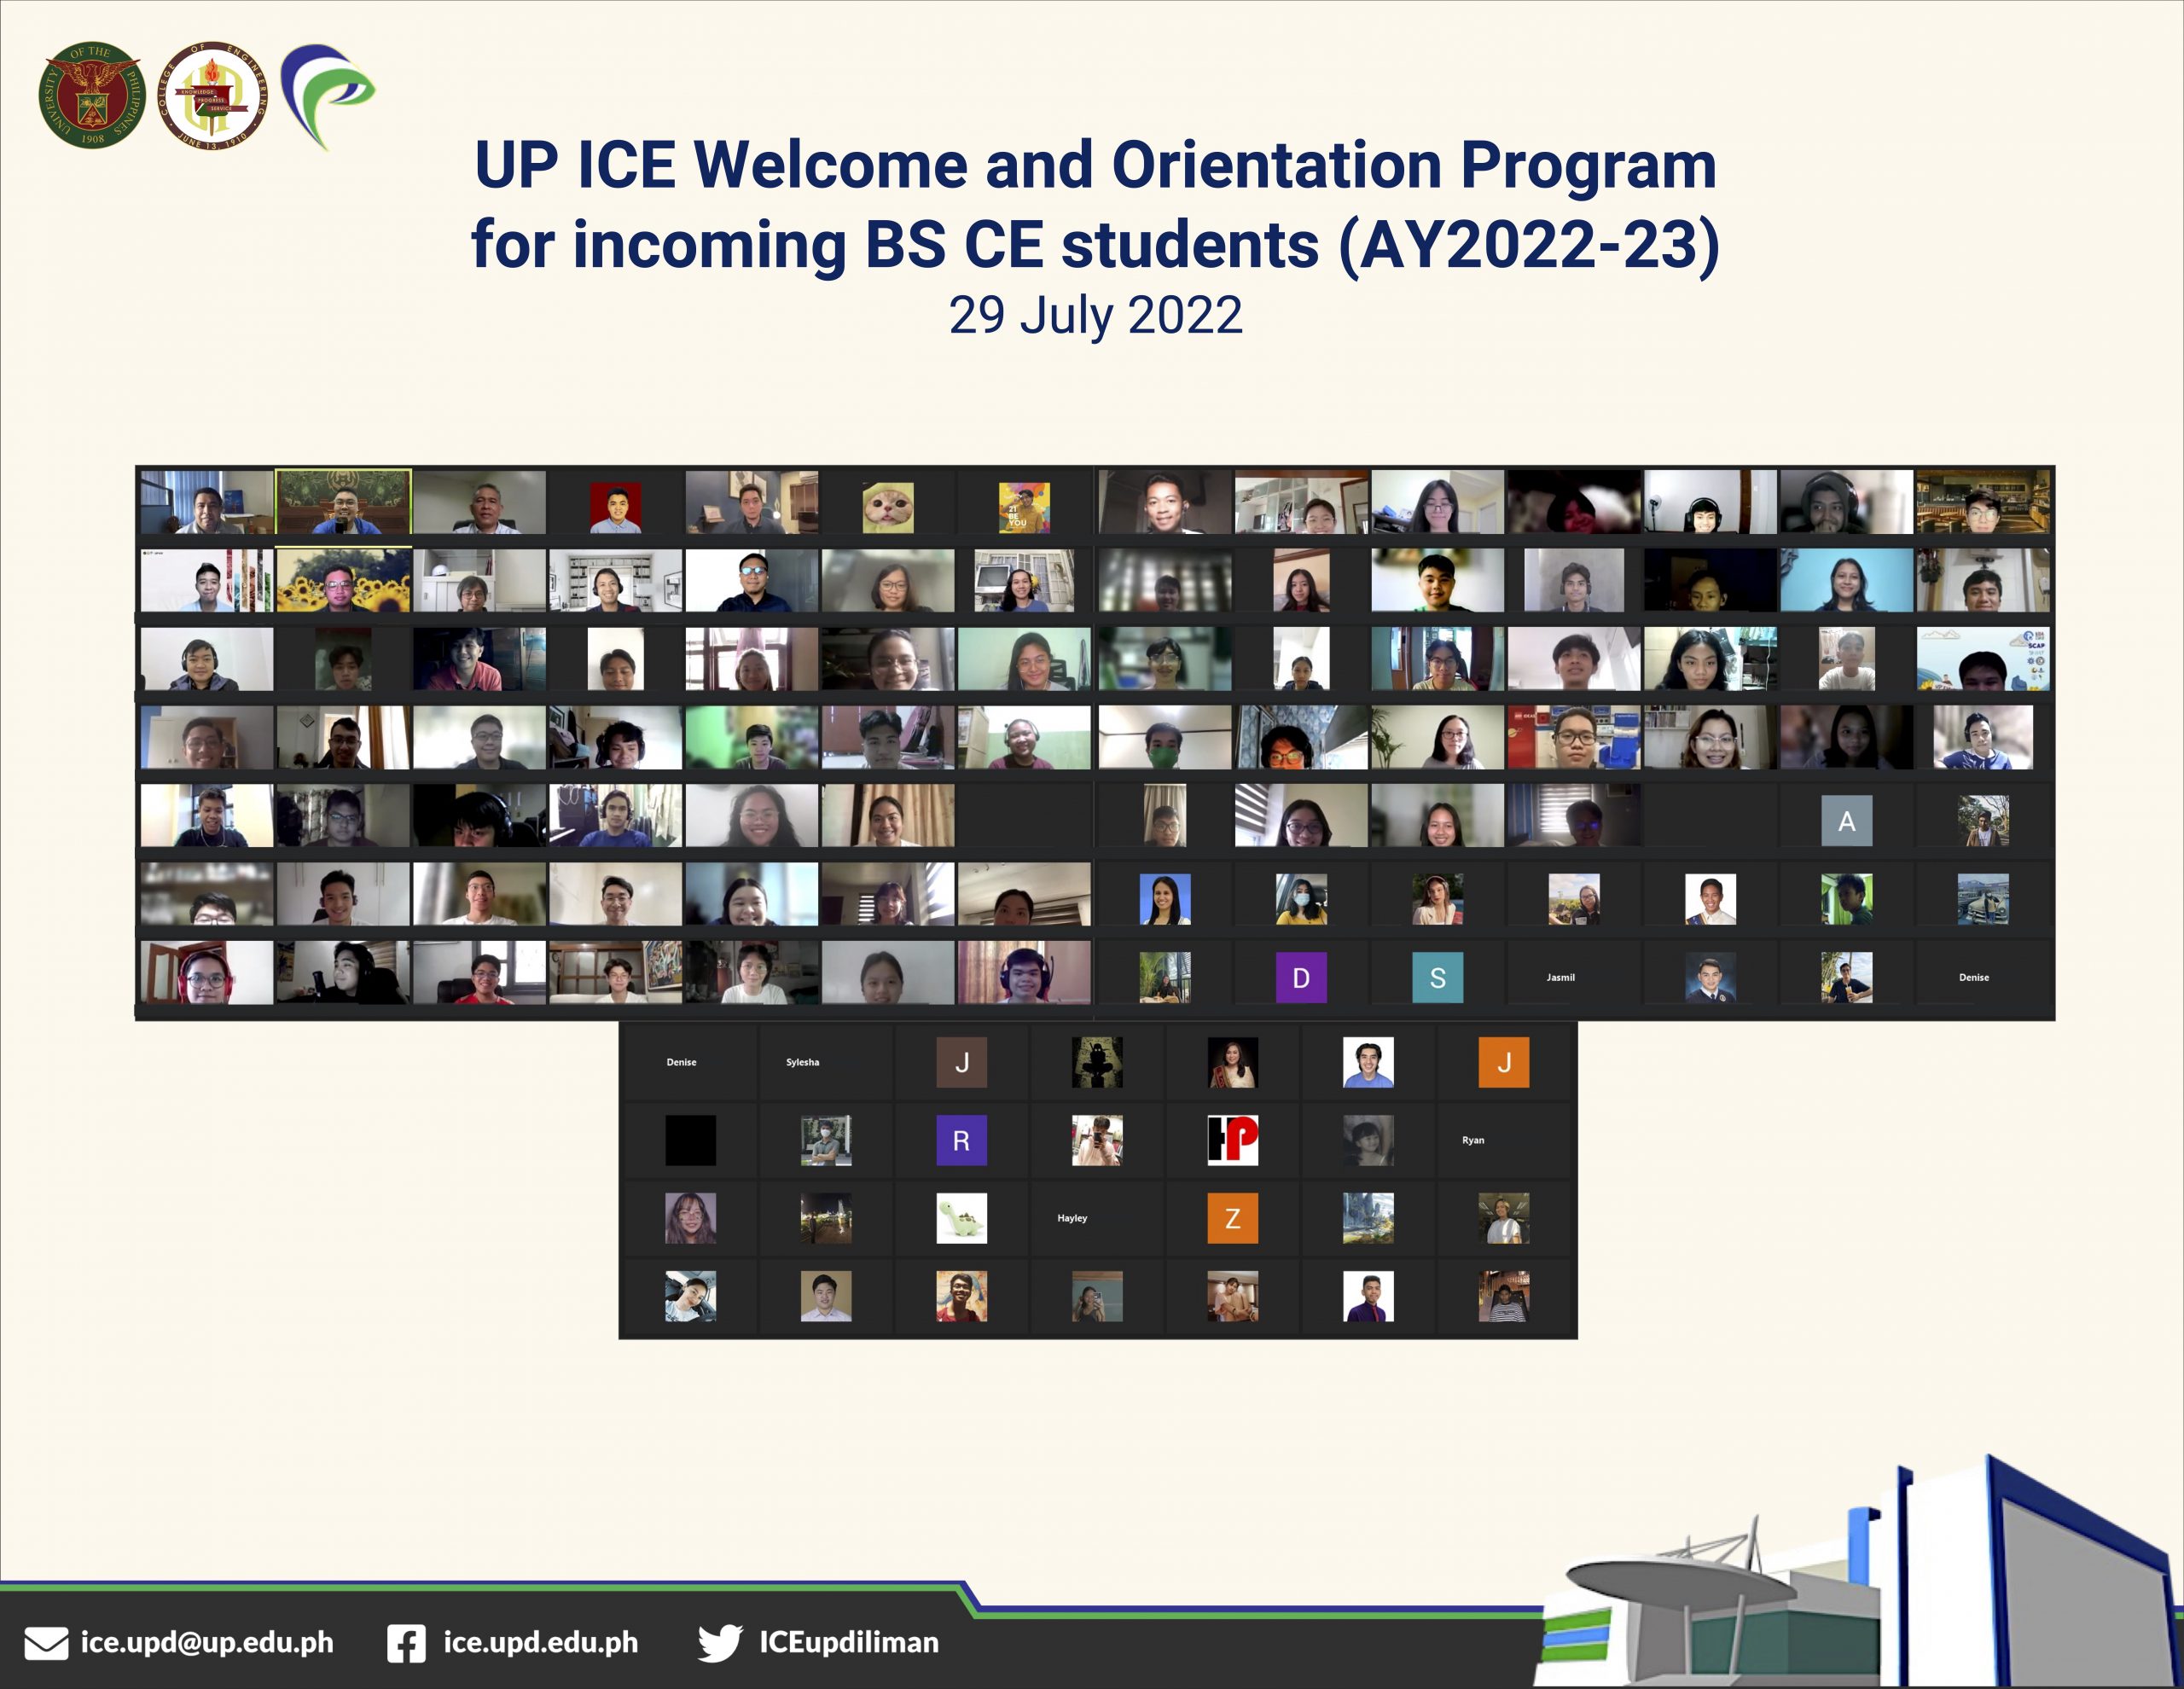 UP ICE welcomes incoming BS CE students for AY2022-2023